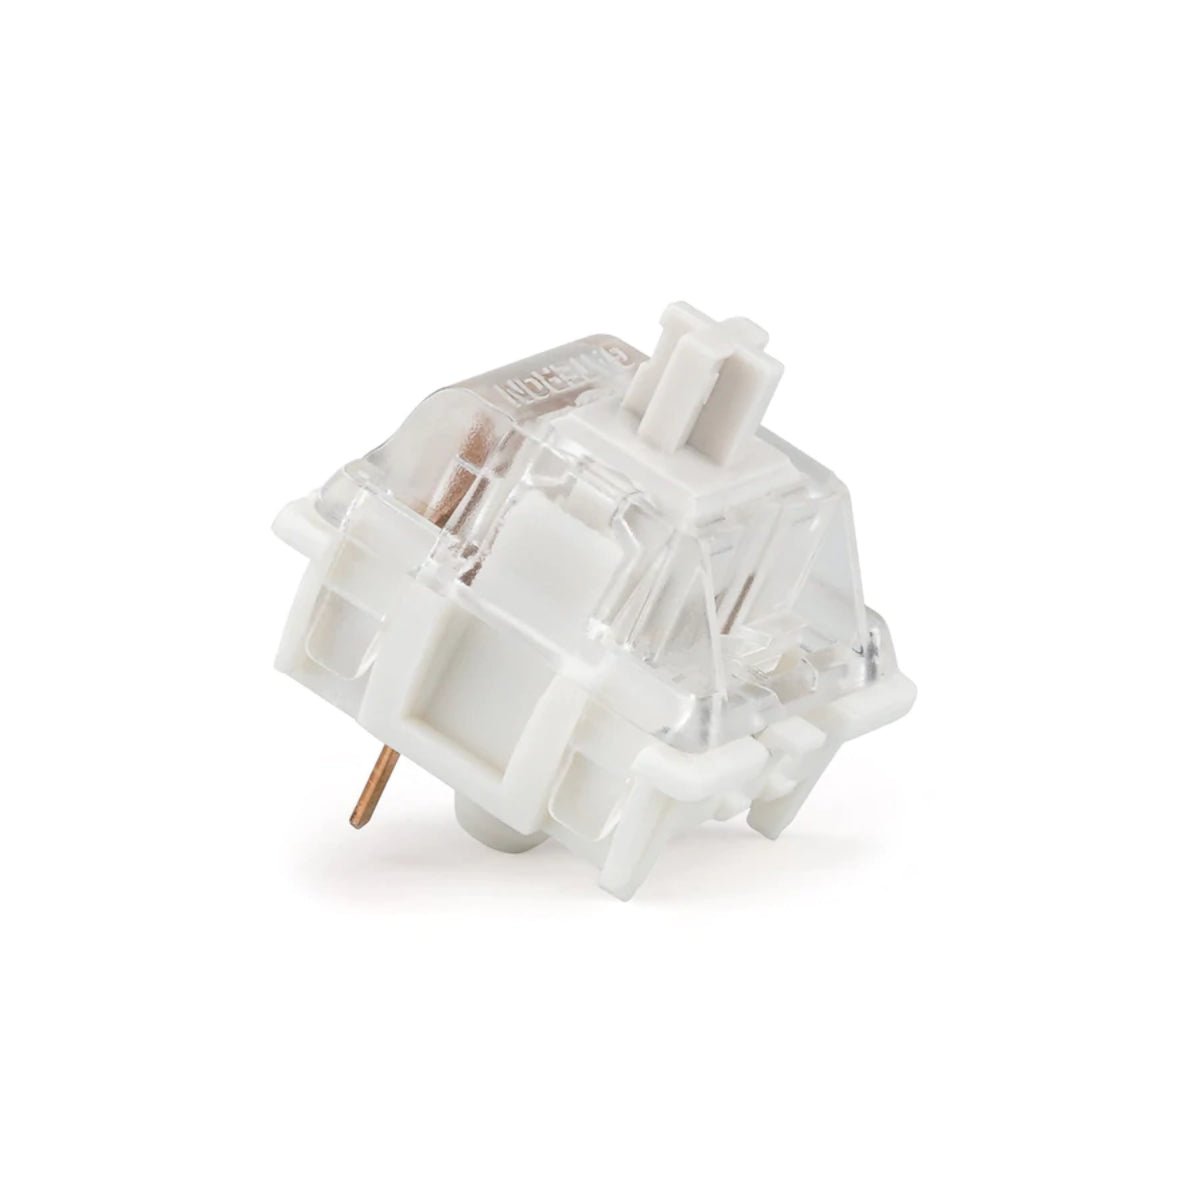 KBD Fans Gateron Pro Two-Stage Linear Switches - White - Store 974 | ستور ٩٧٤